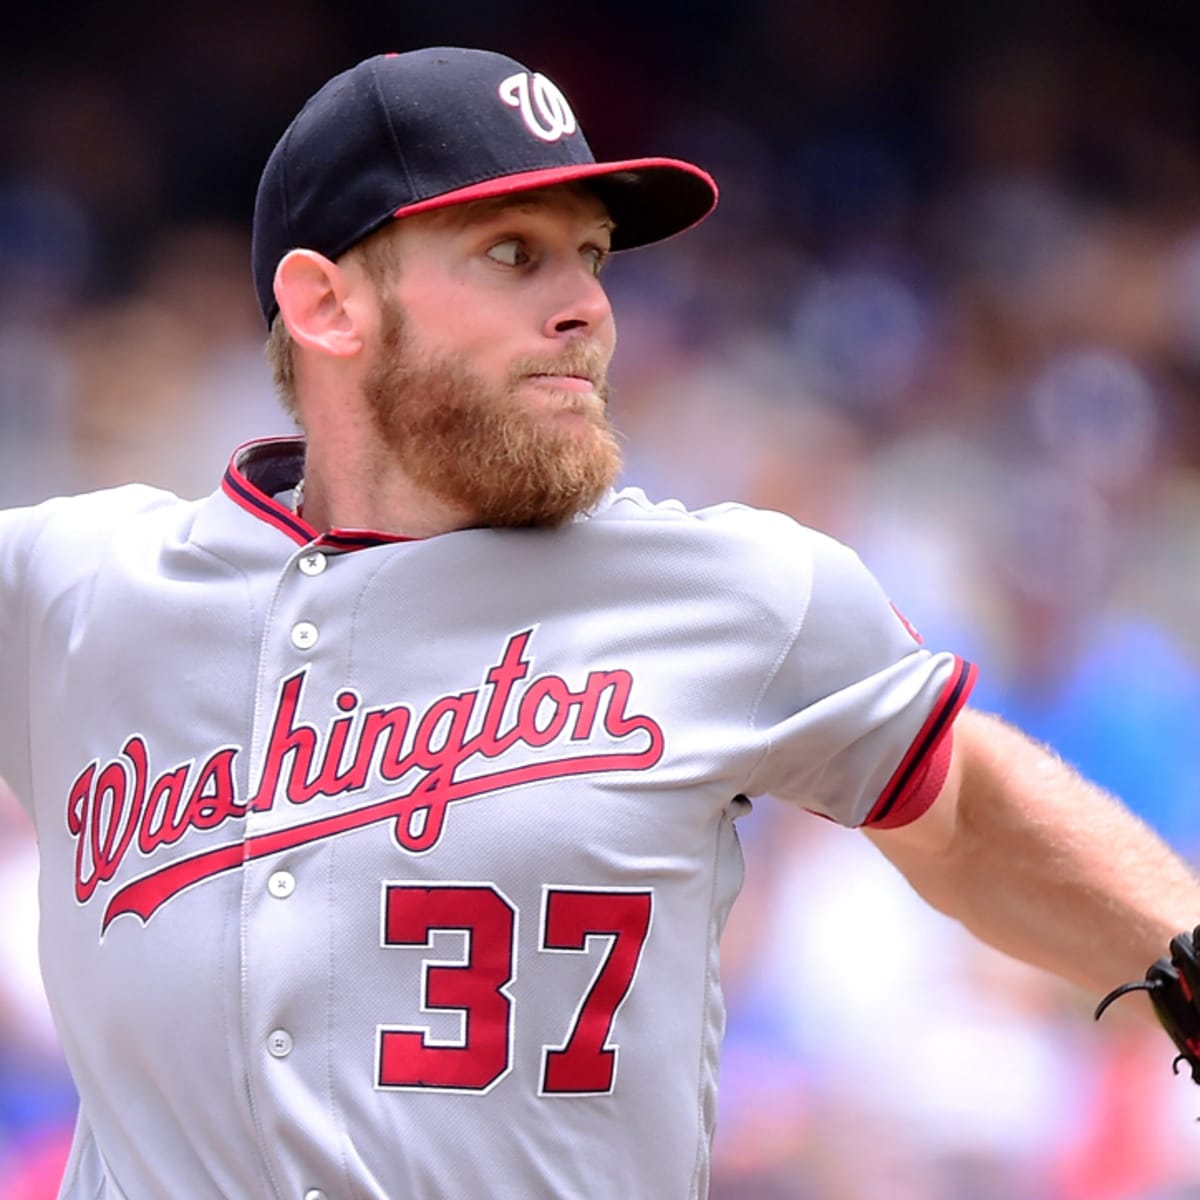 Strasburg returns, pitches into 6th, Nats beat Orioles 4-2